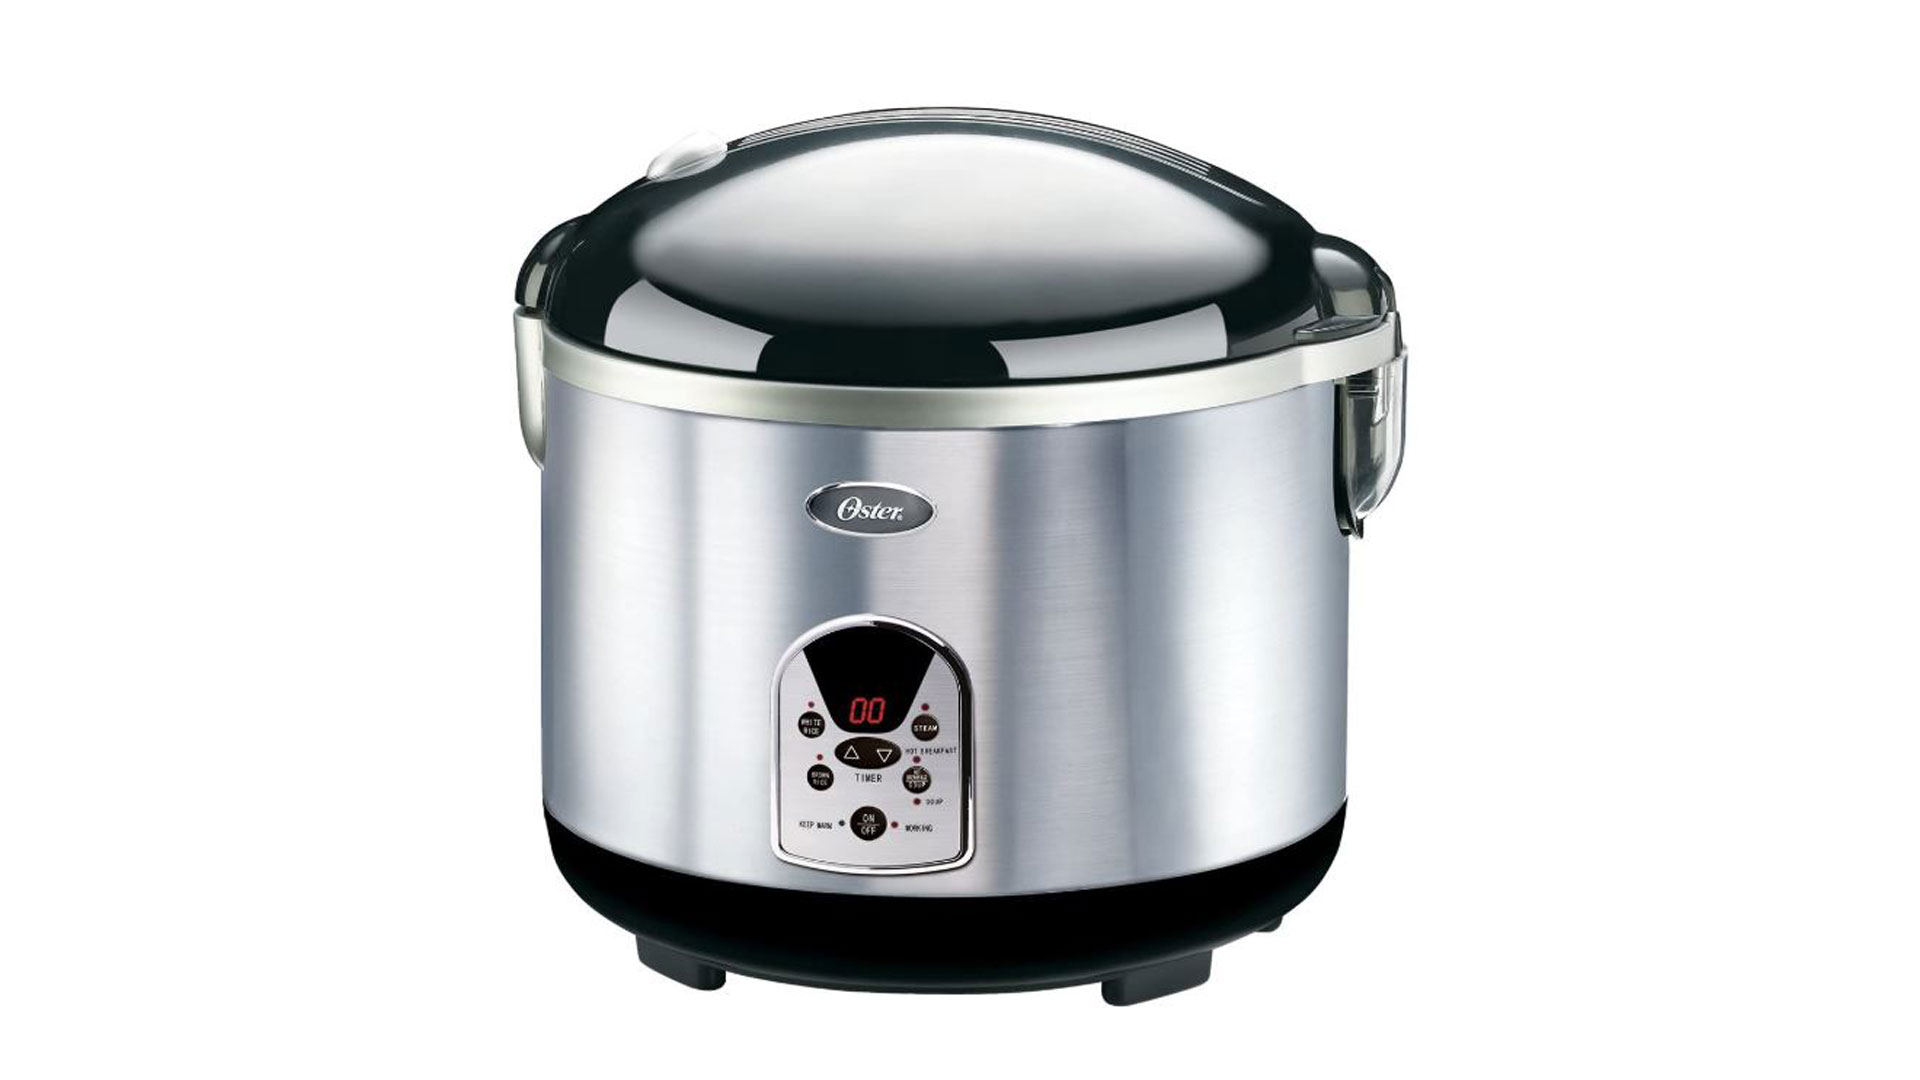 Oster 6-Cup CKSTRCMS65 Rice Cooker review